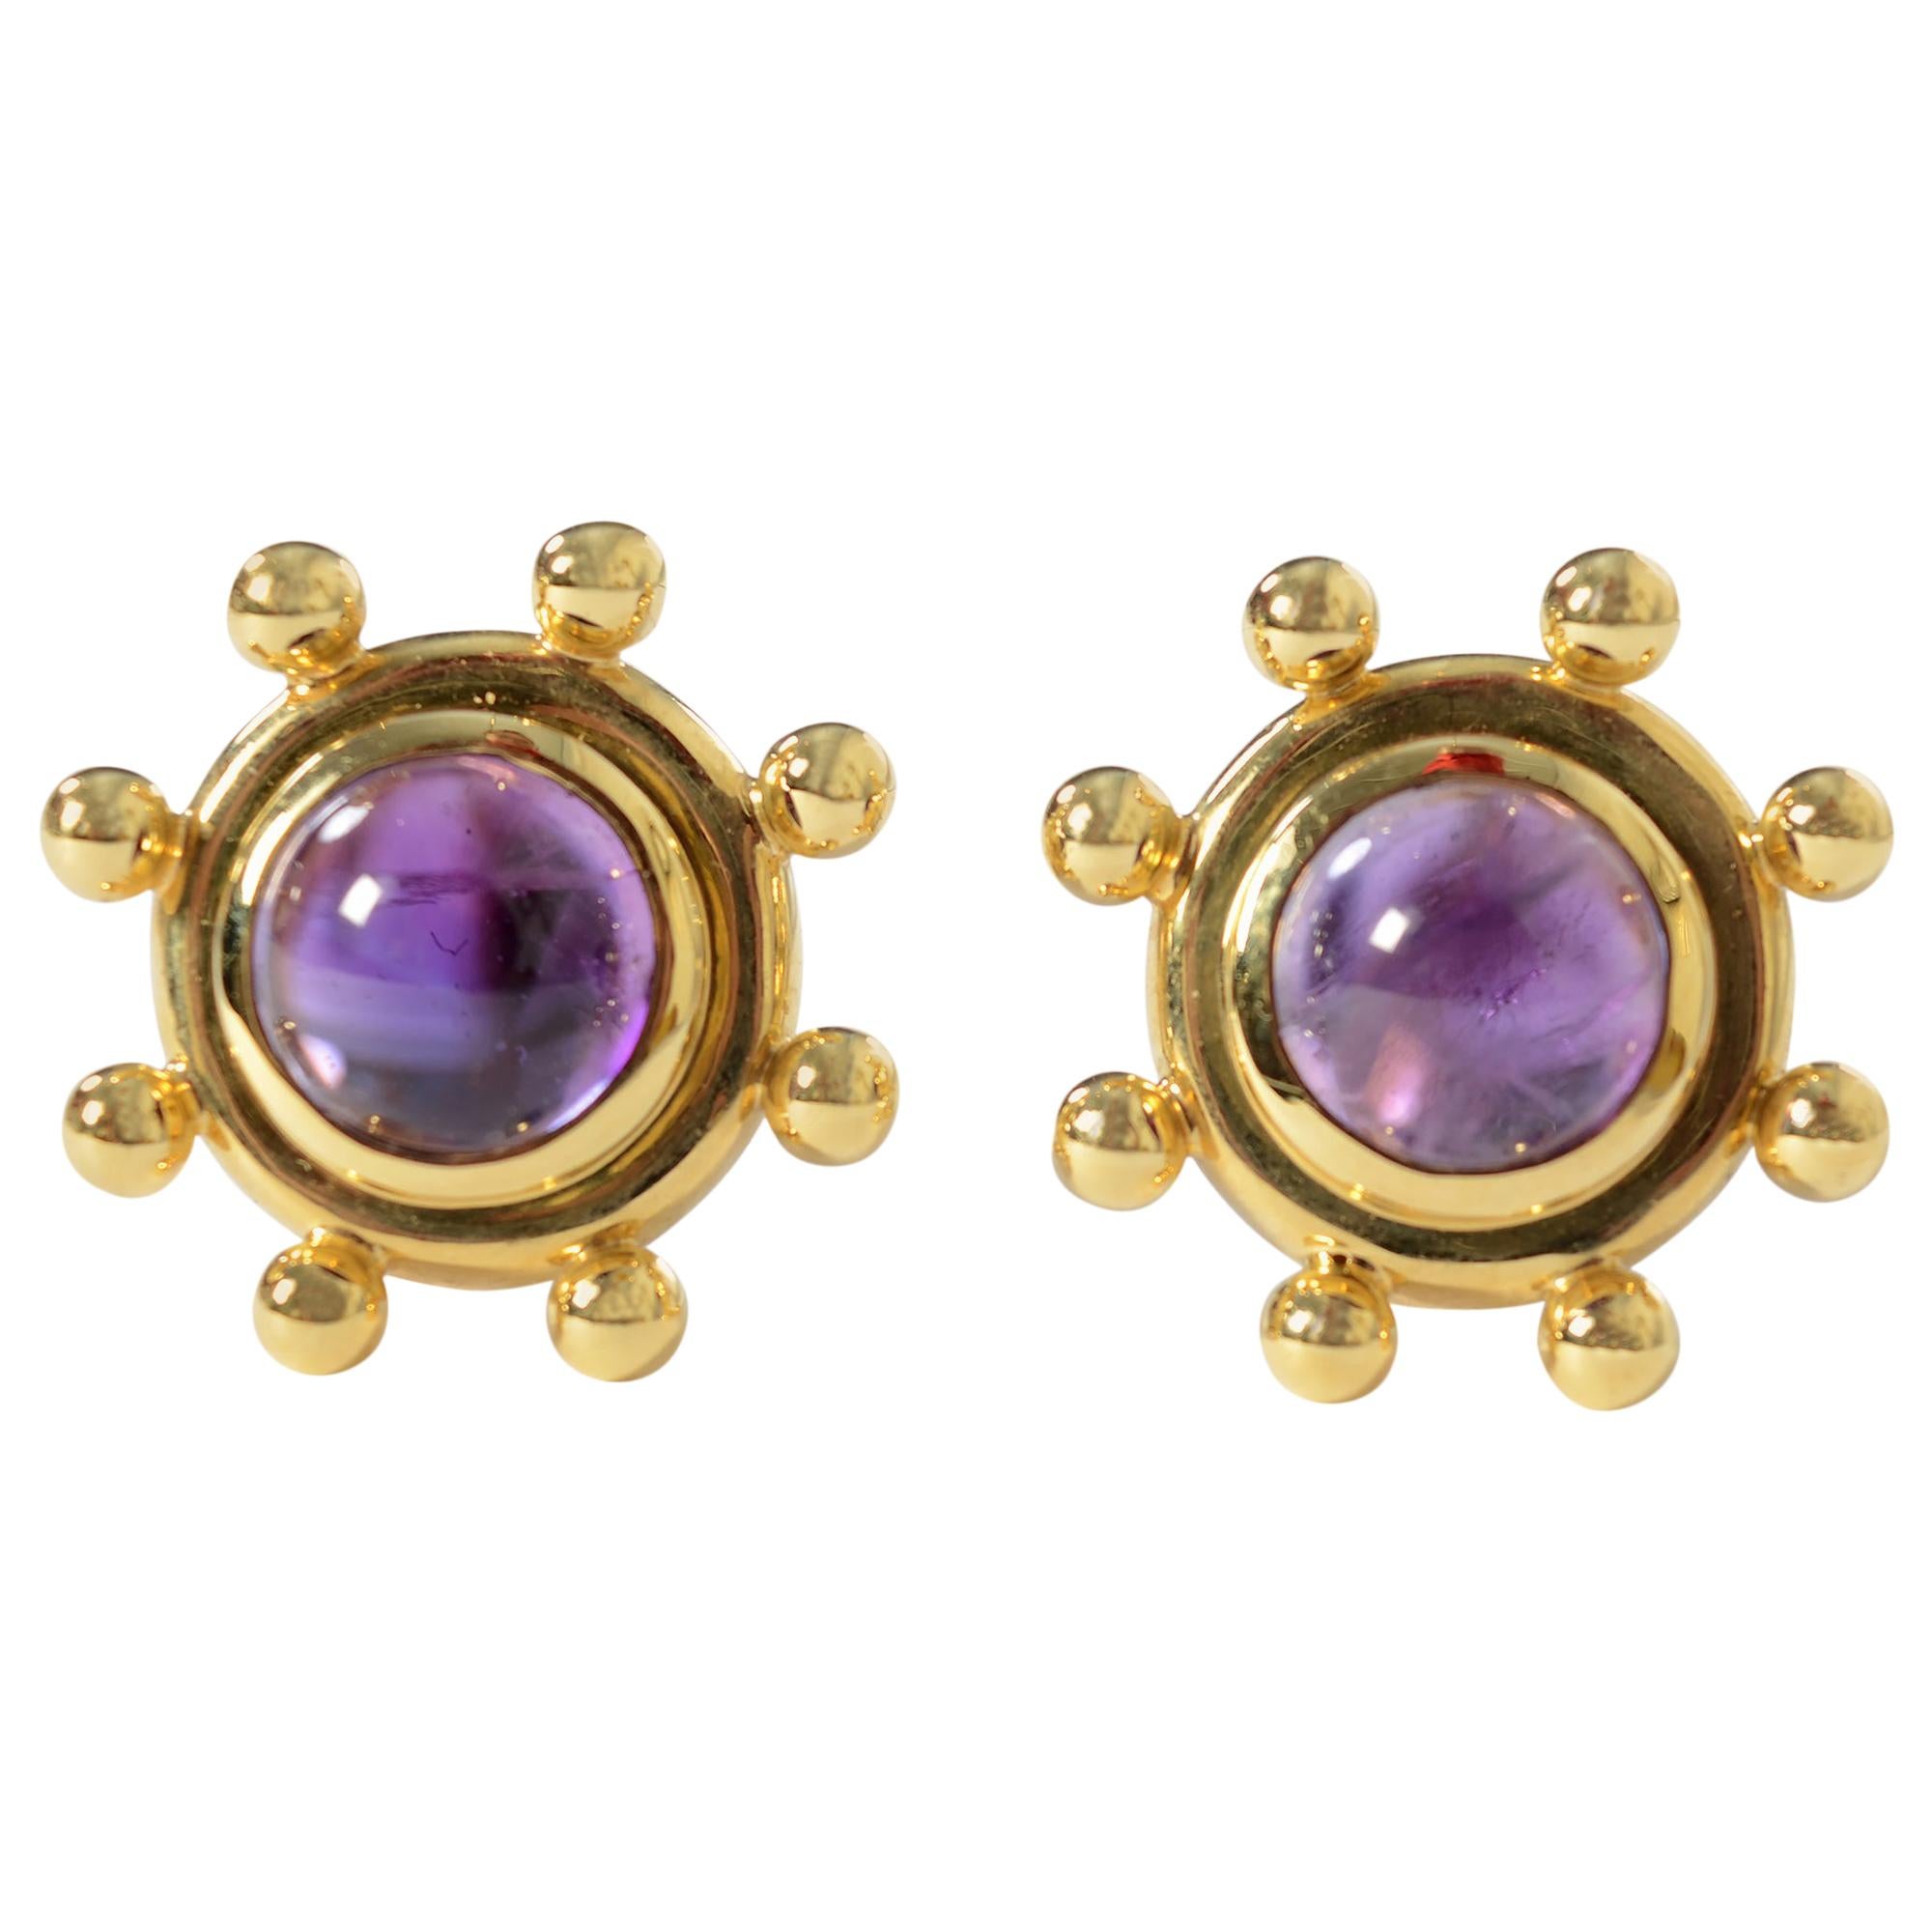 Paloma Picasso for Tiffany Amethyst Earrings